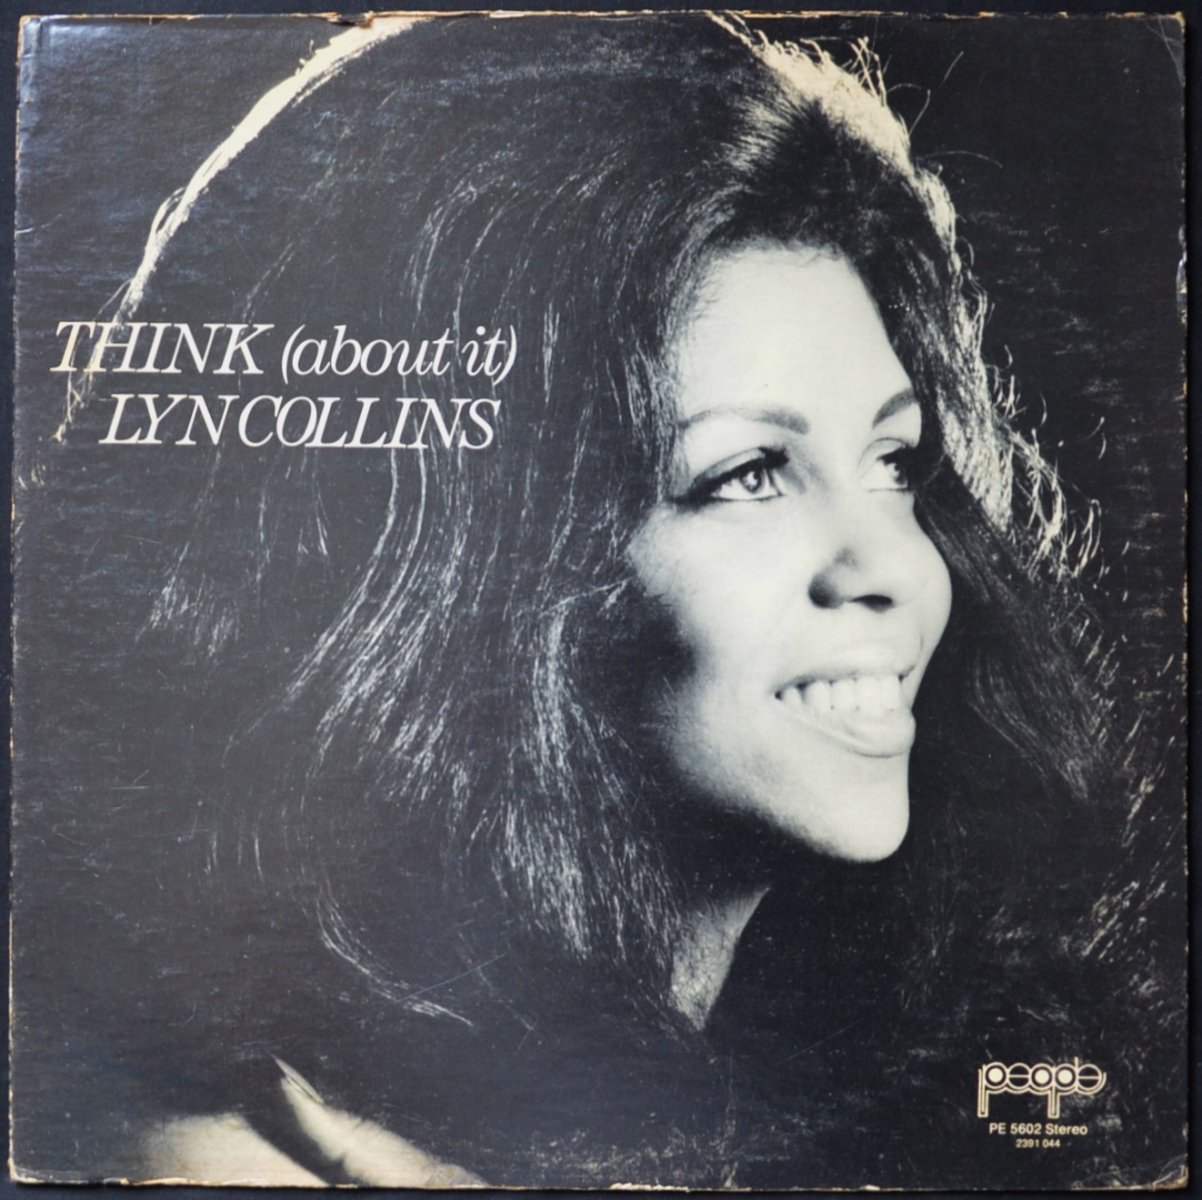 LYN COLLINS / THINK (ABOUT IT) (LP)